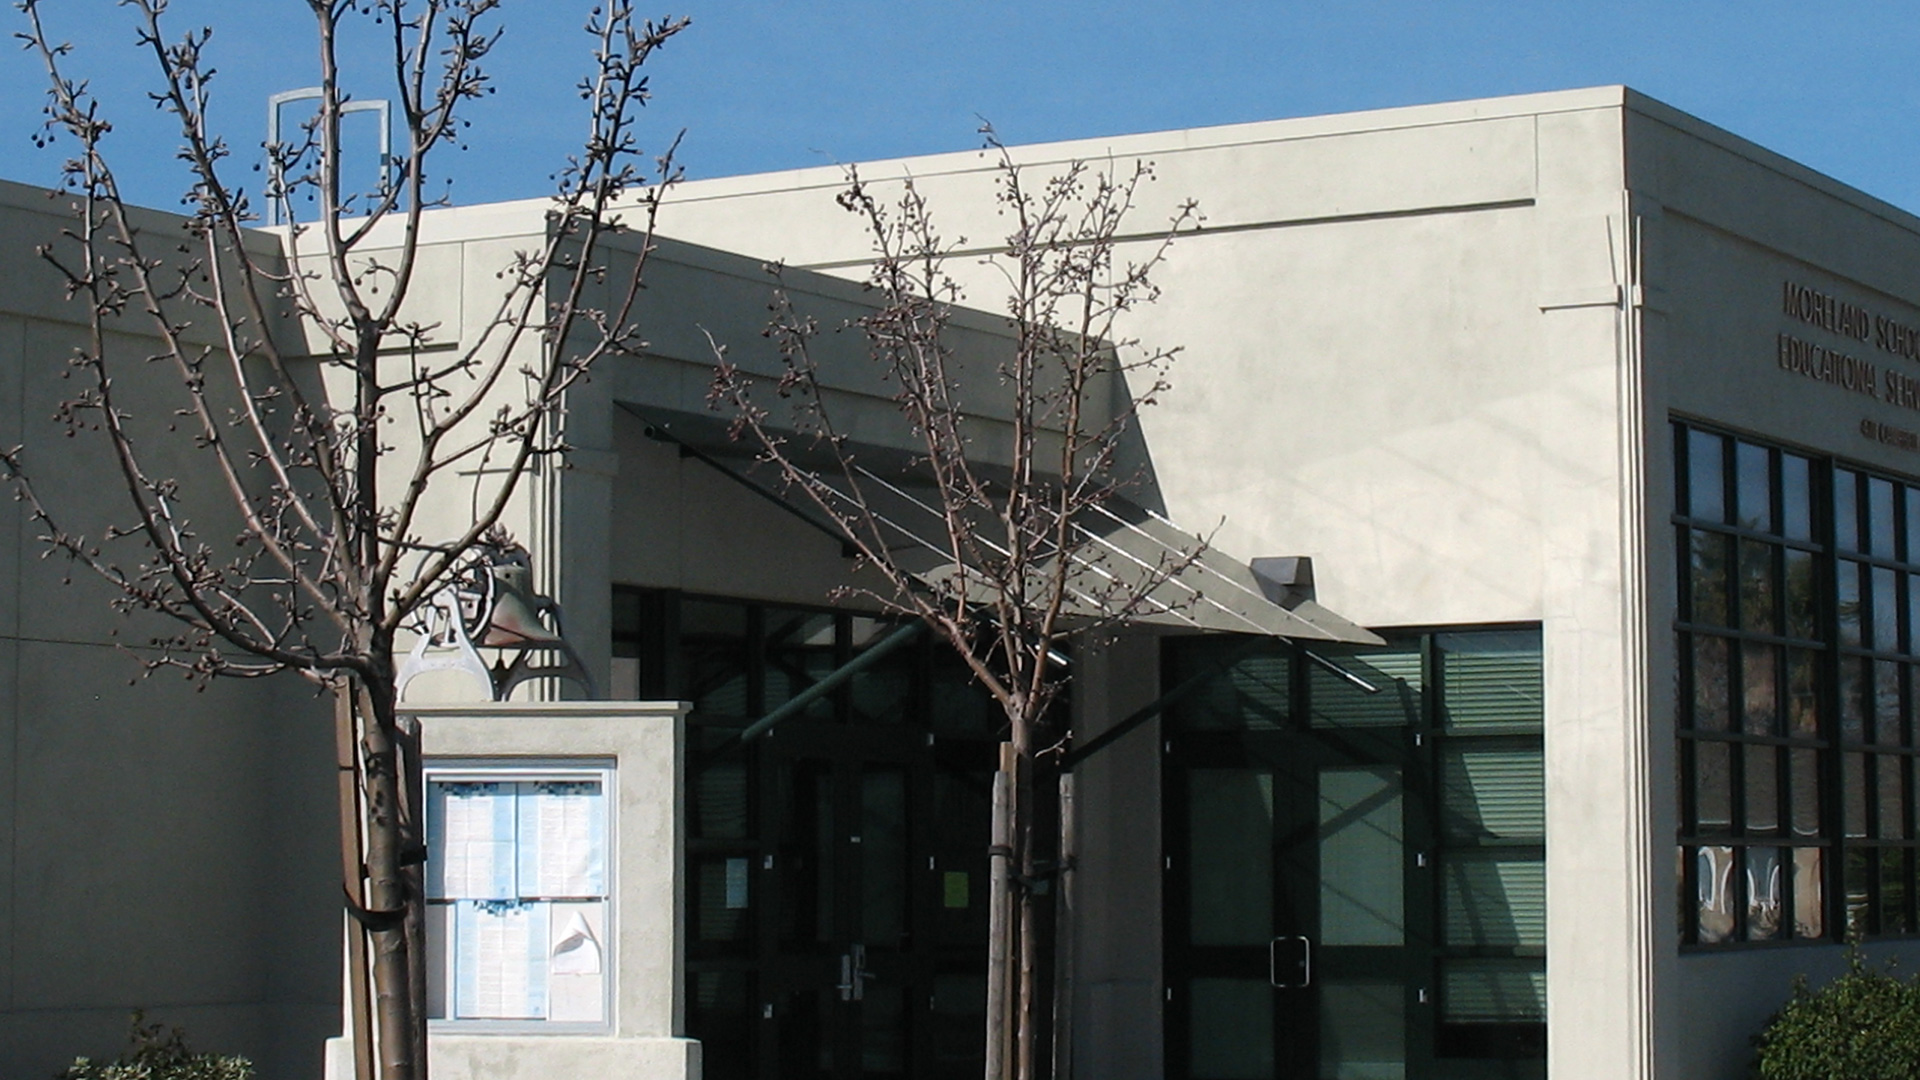 Entrance to district office, with glass awning, trees, and directory in front.